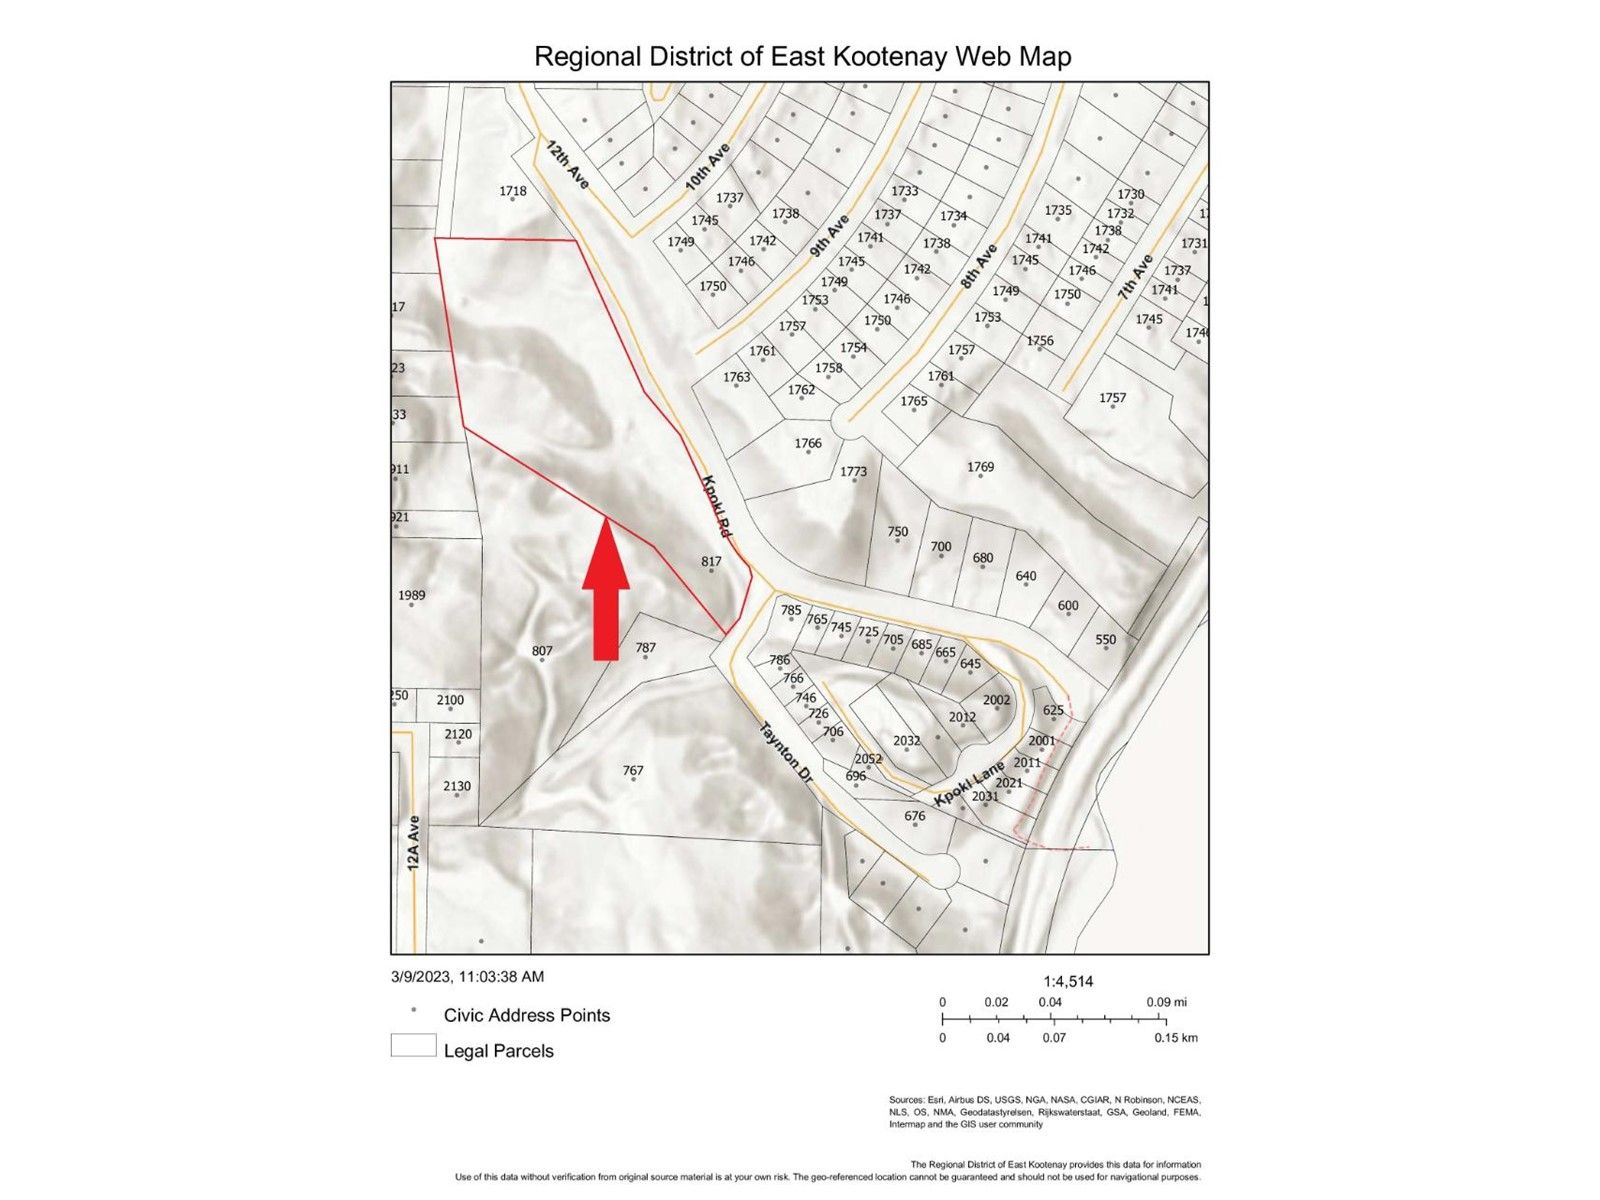 Main Photo: 817 KPOKL ROAD in Invermere: Vacant Land for sale : MLS®# 2469457